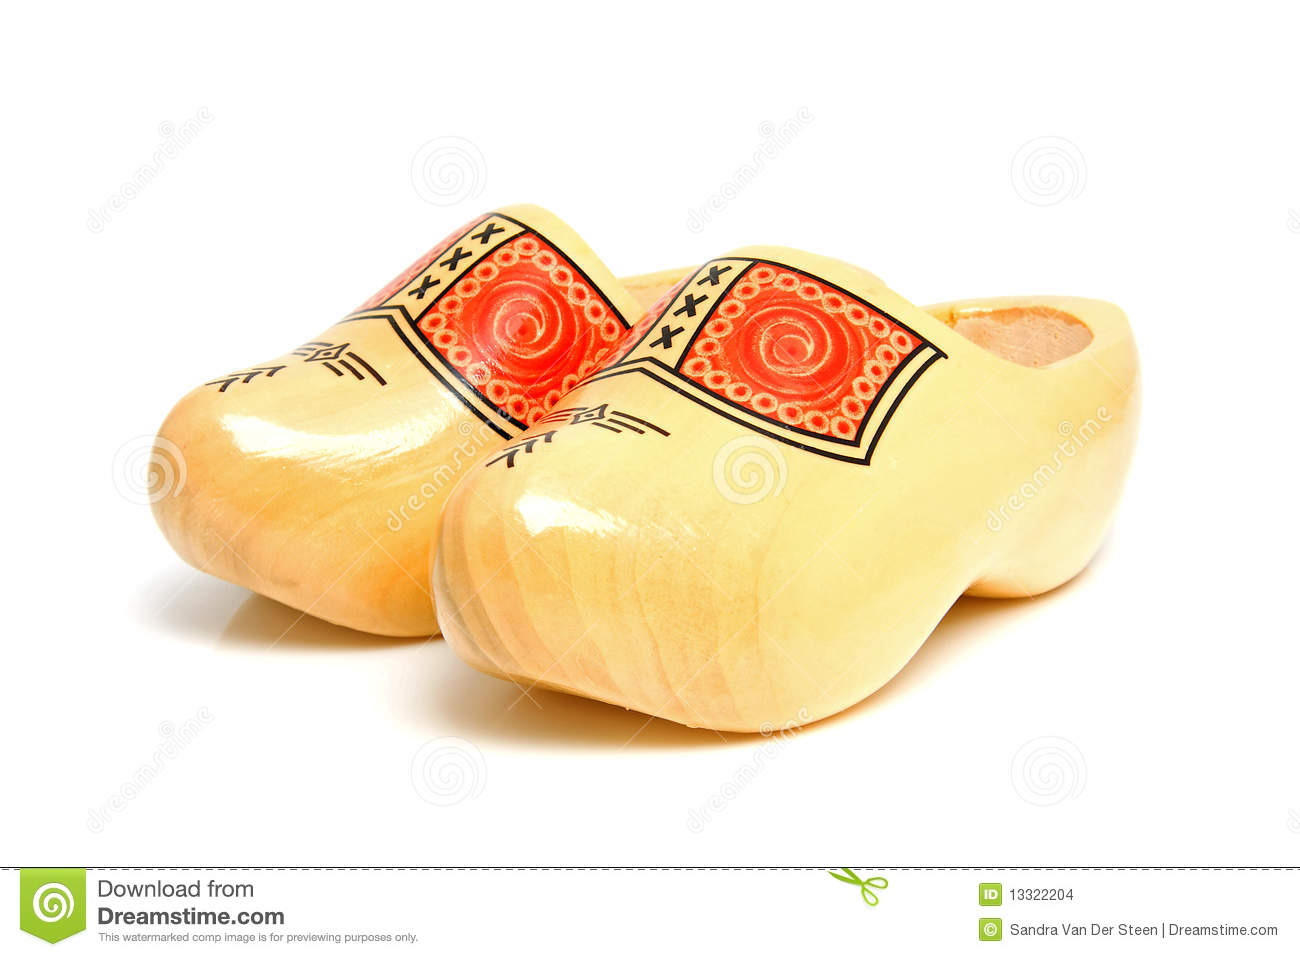 Pair Of Traditional Dutch Yellow Wooden Shoes Stock Images   Image